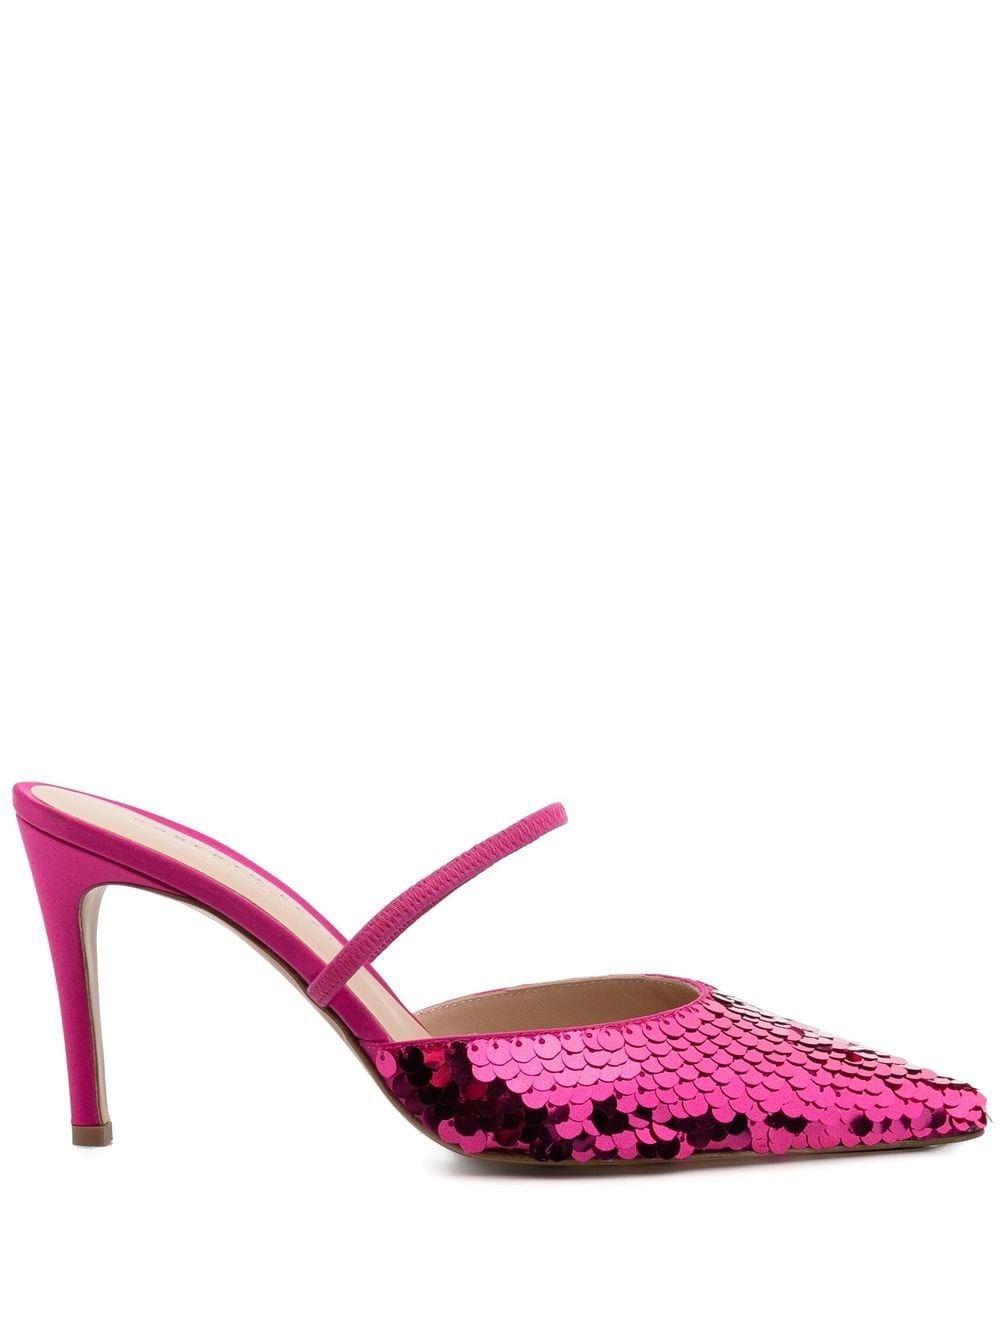 Roberto Festa Sequin Pointed 90mm Mules In Pink & Purple